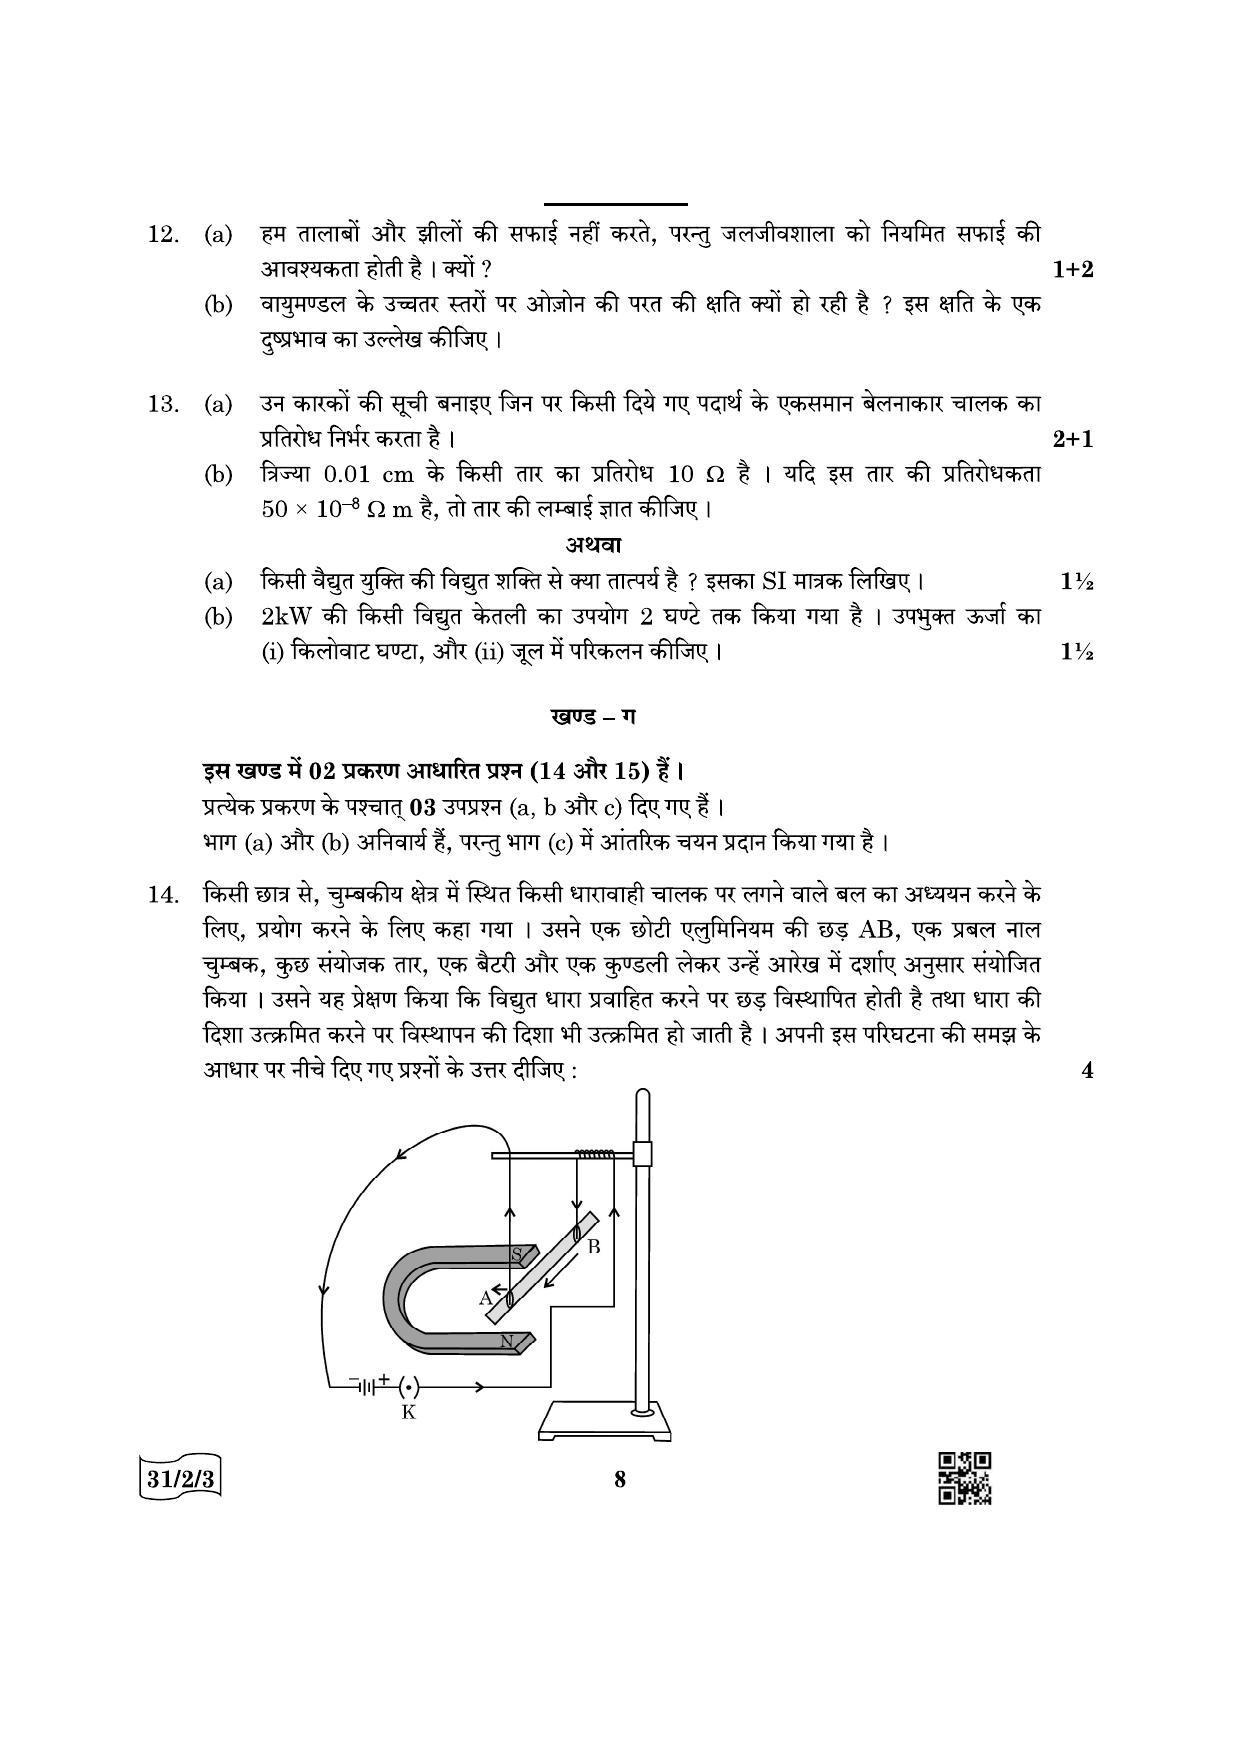 CBSE Class 10 31-2-3 Science 2022 Question Paper - Page 8